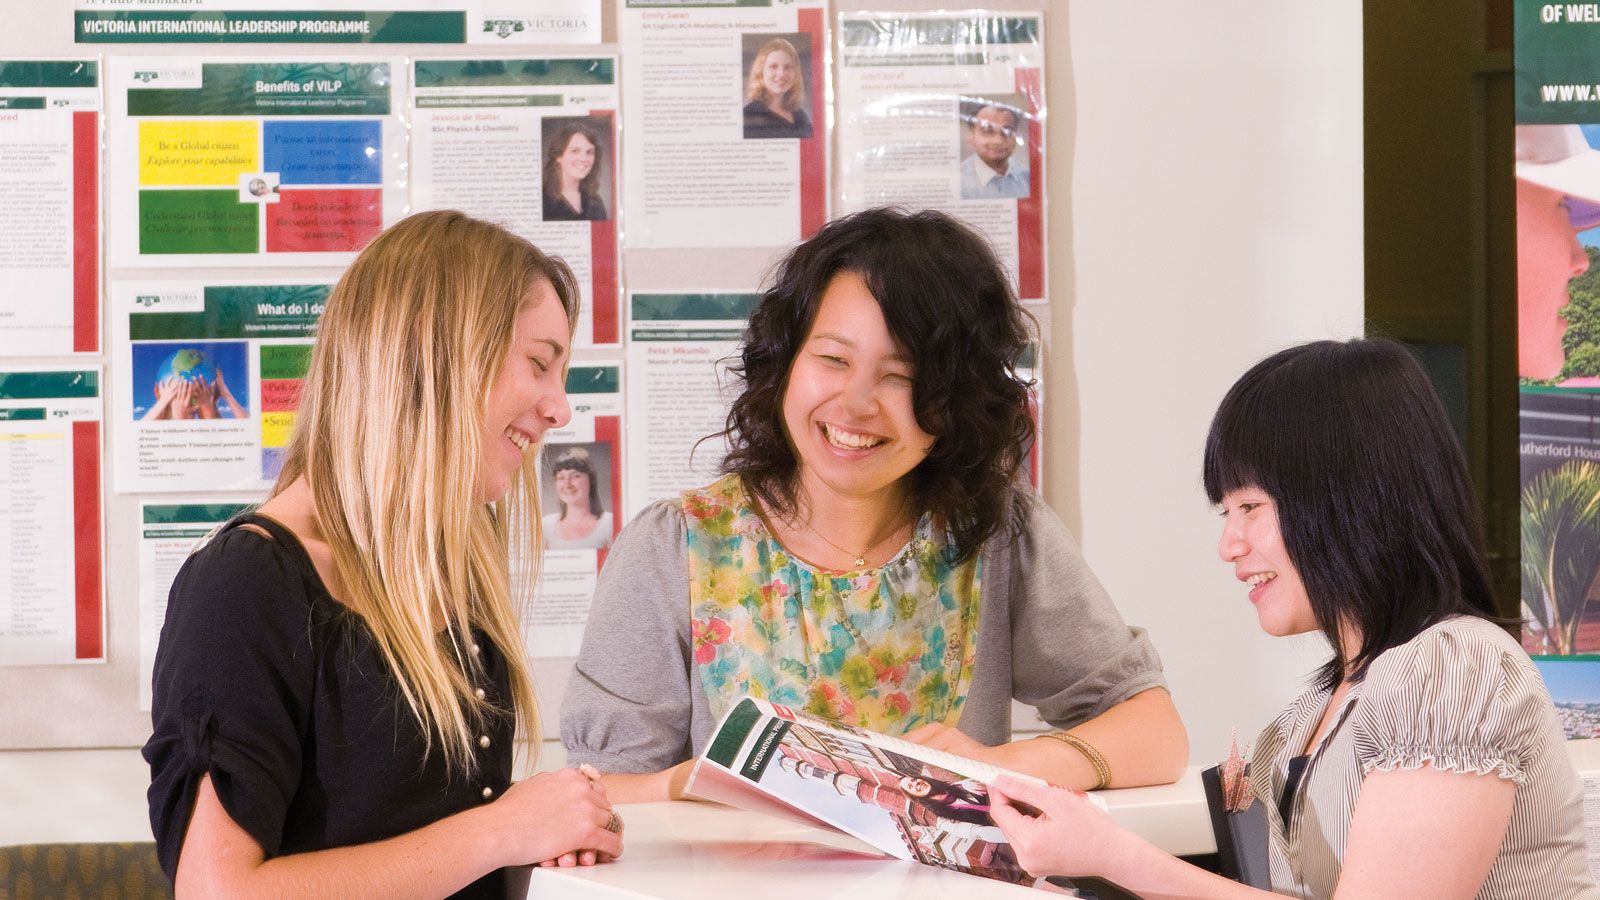 A female advisor and two female students smile while looking at pamphlet.